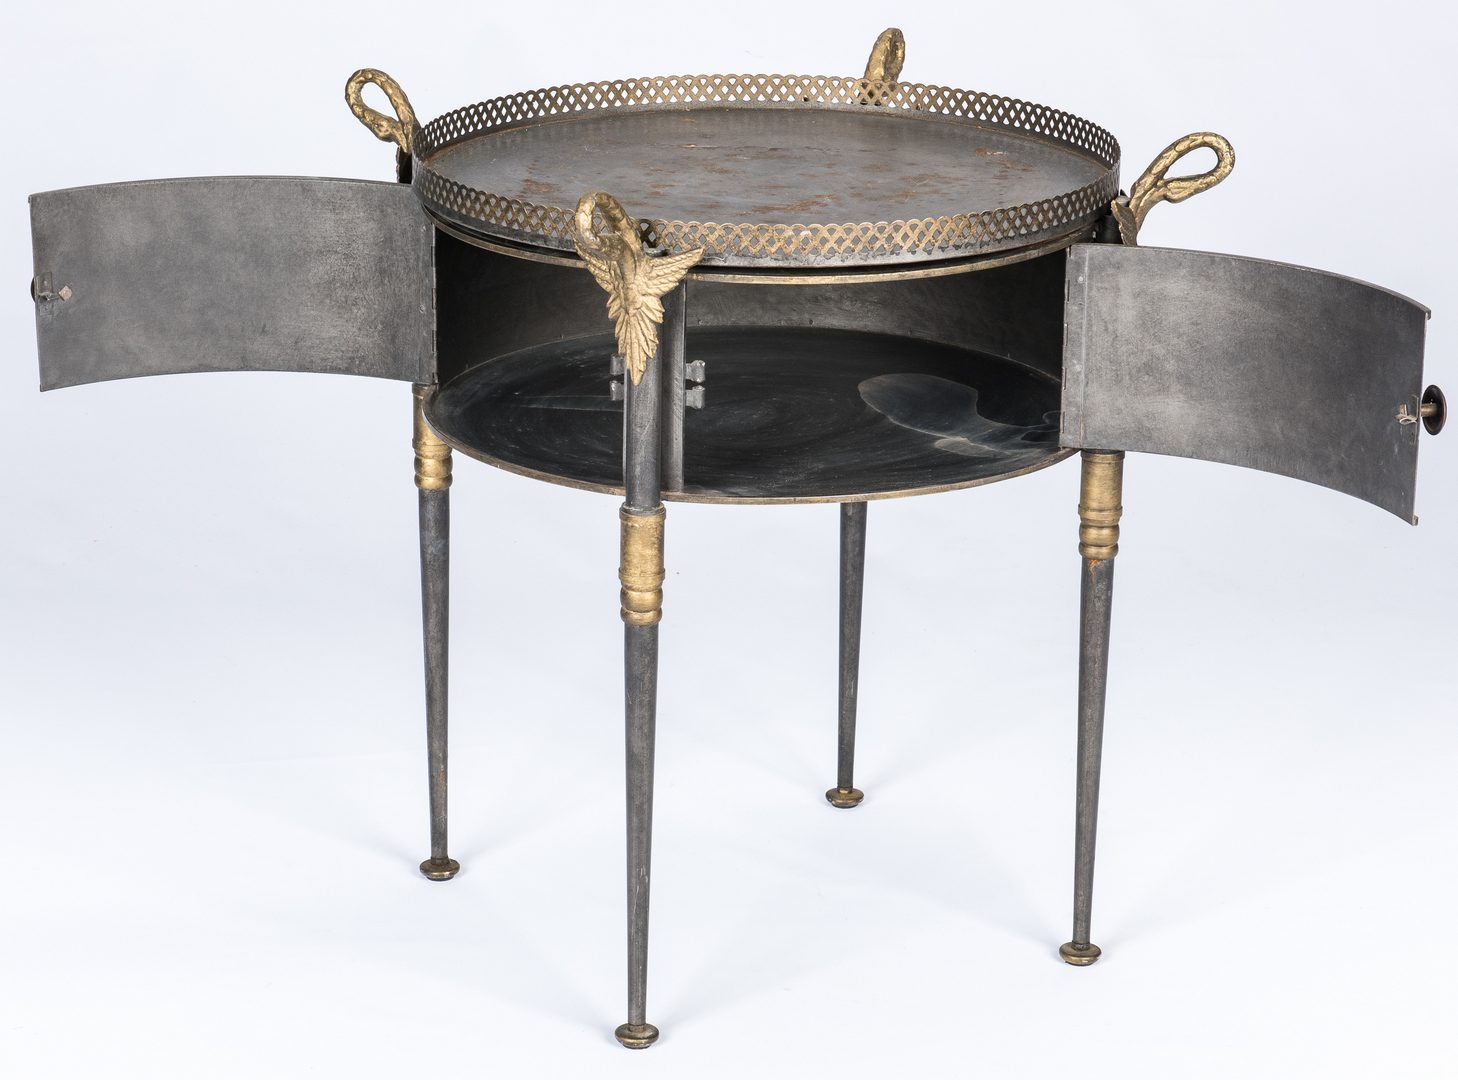 Lot 662: Trouvailles French Empire Style Metal Drum Table